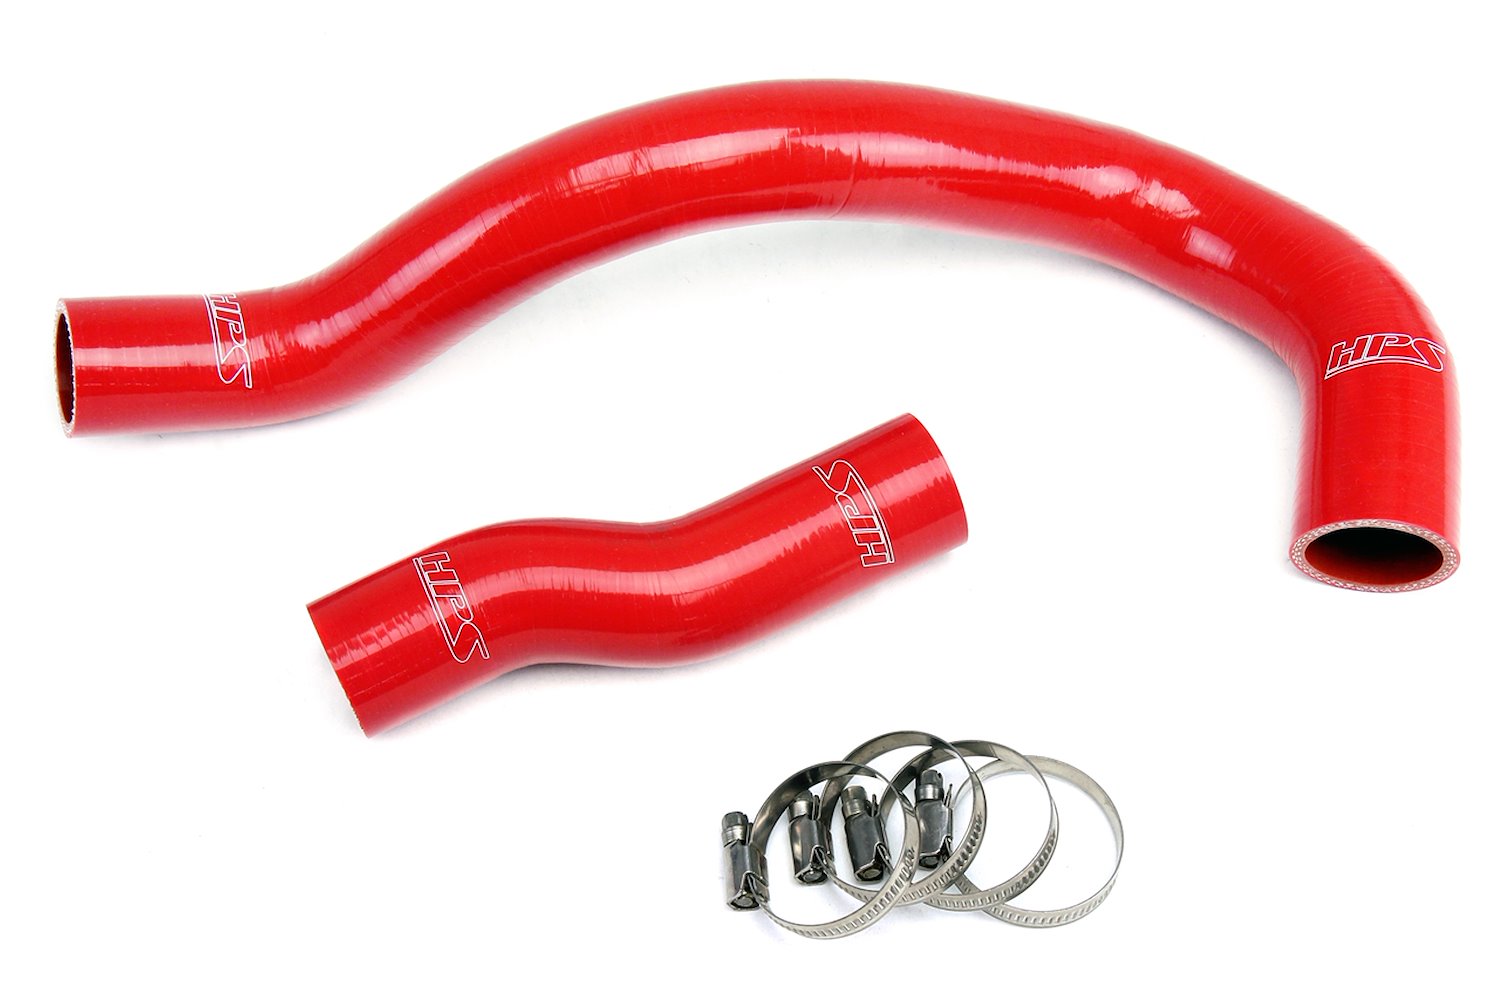 57-1266-RED Radiator Hose Kit, High-Temp 3-Ply Reinforced Silicone, Replace OEM Rubber Radiator Coolant Hoses